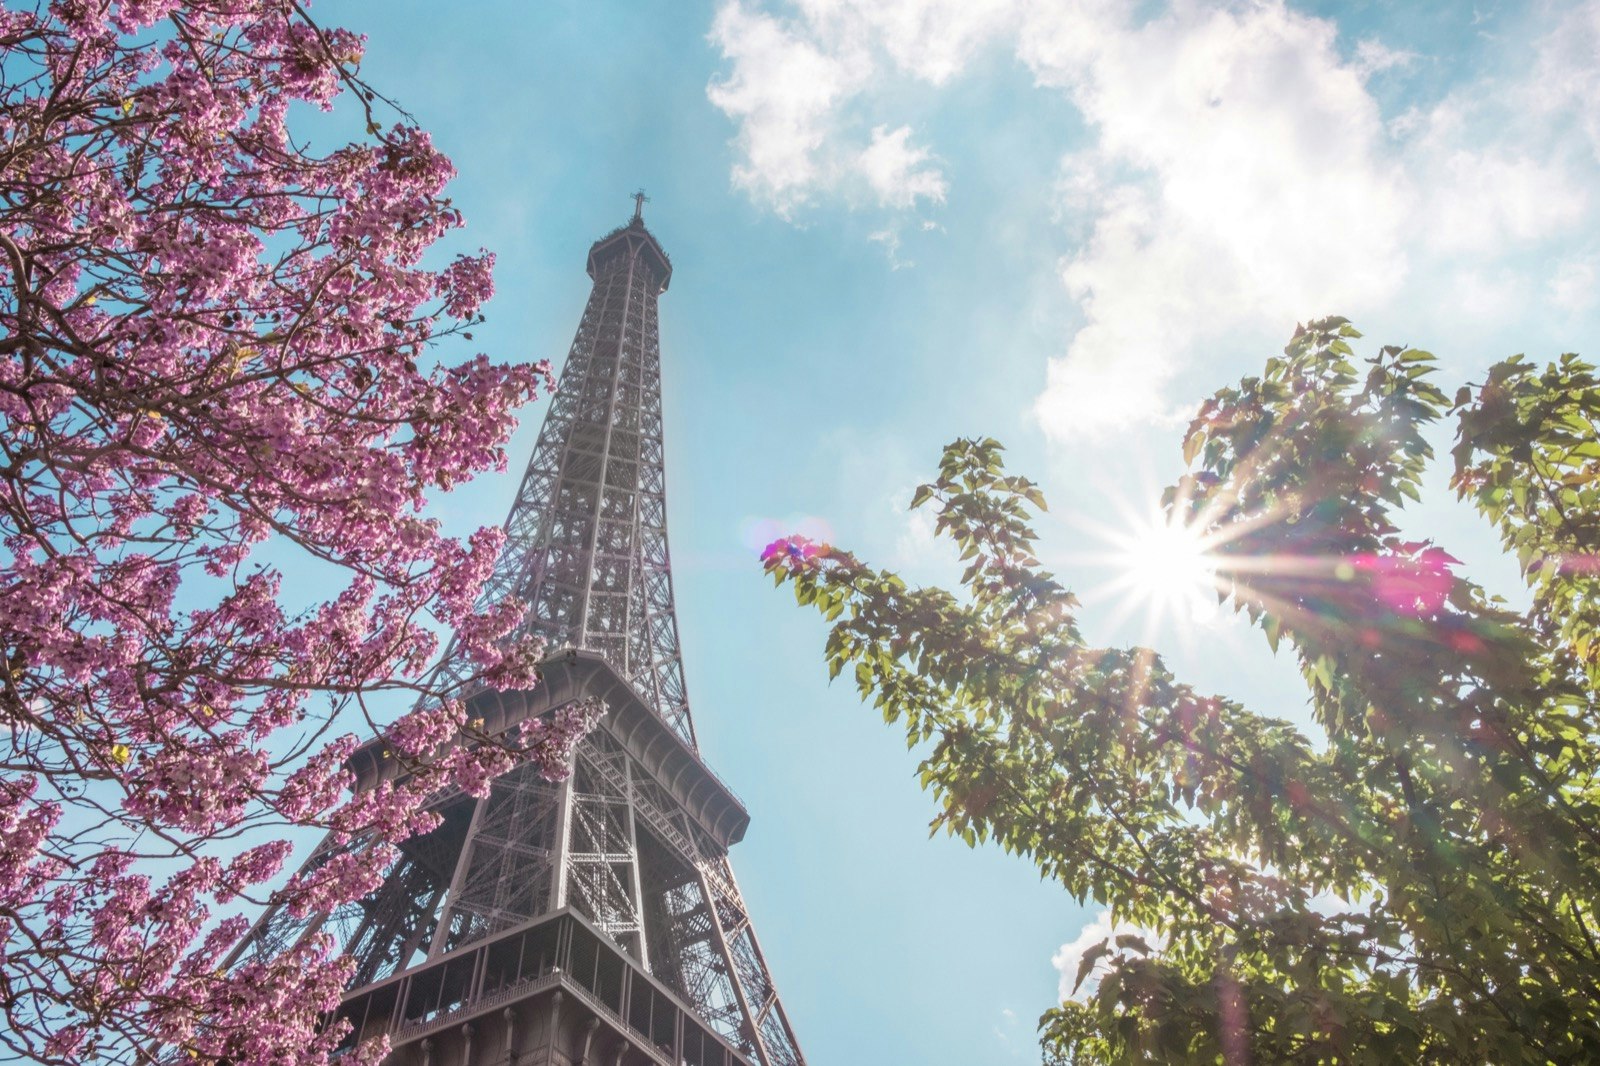 Low angle shot of the Eiffel Tower against a blue sky framed with pink flowering trees